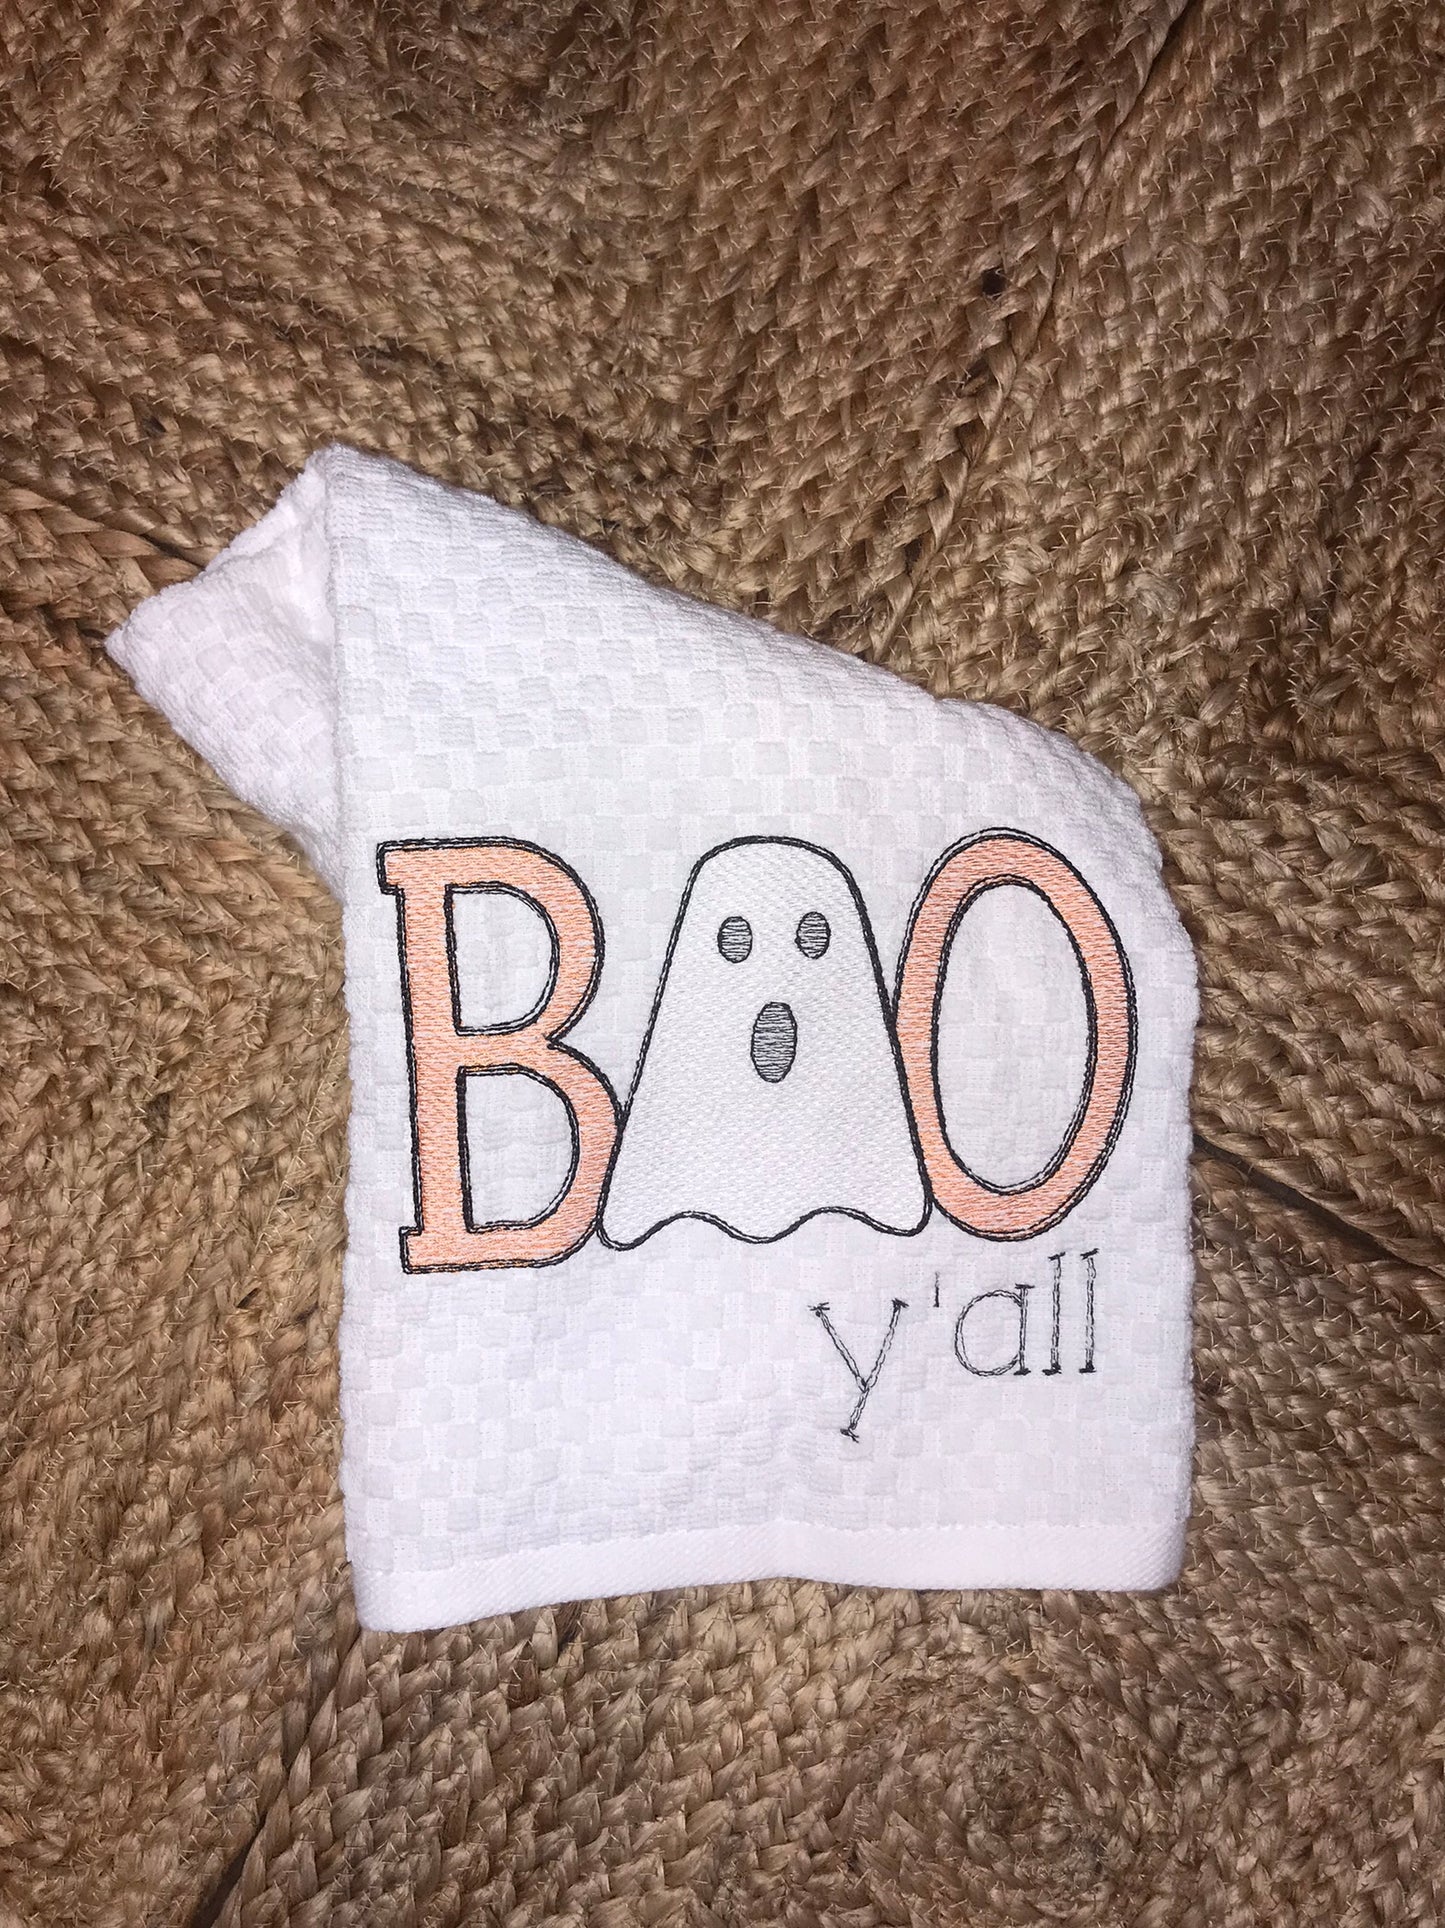 BOO Y’all Kitchen Towel